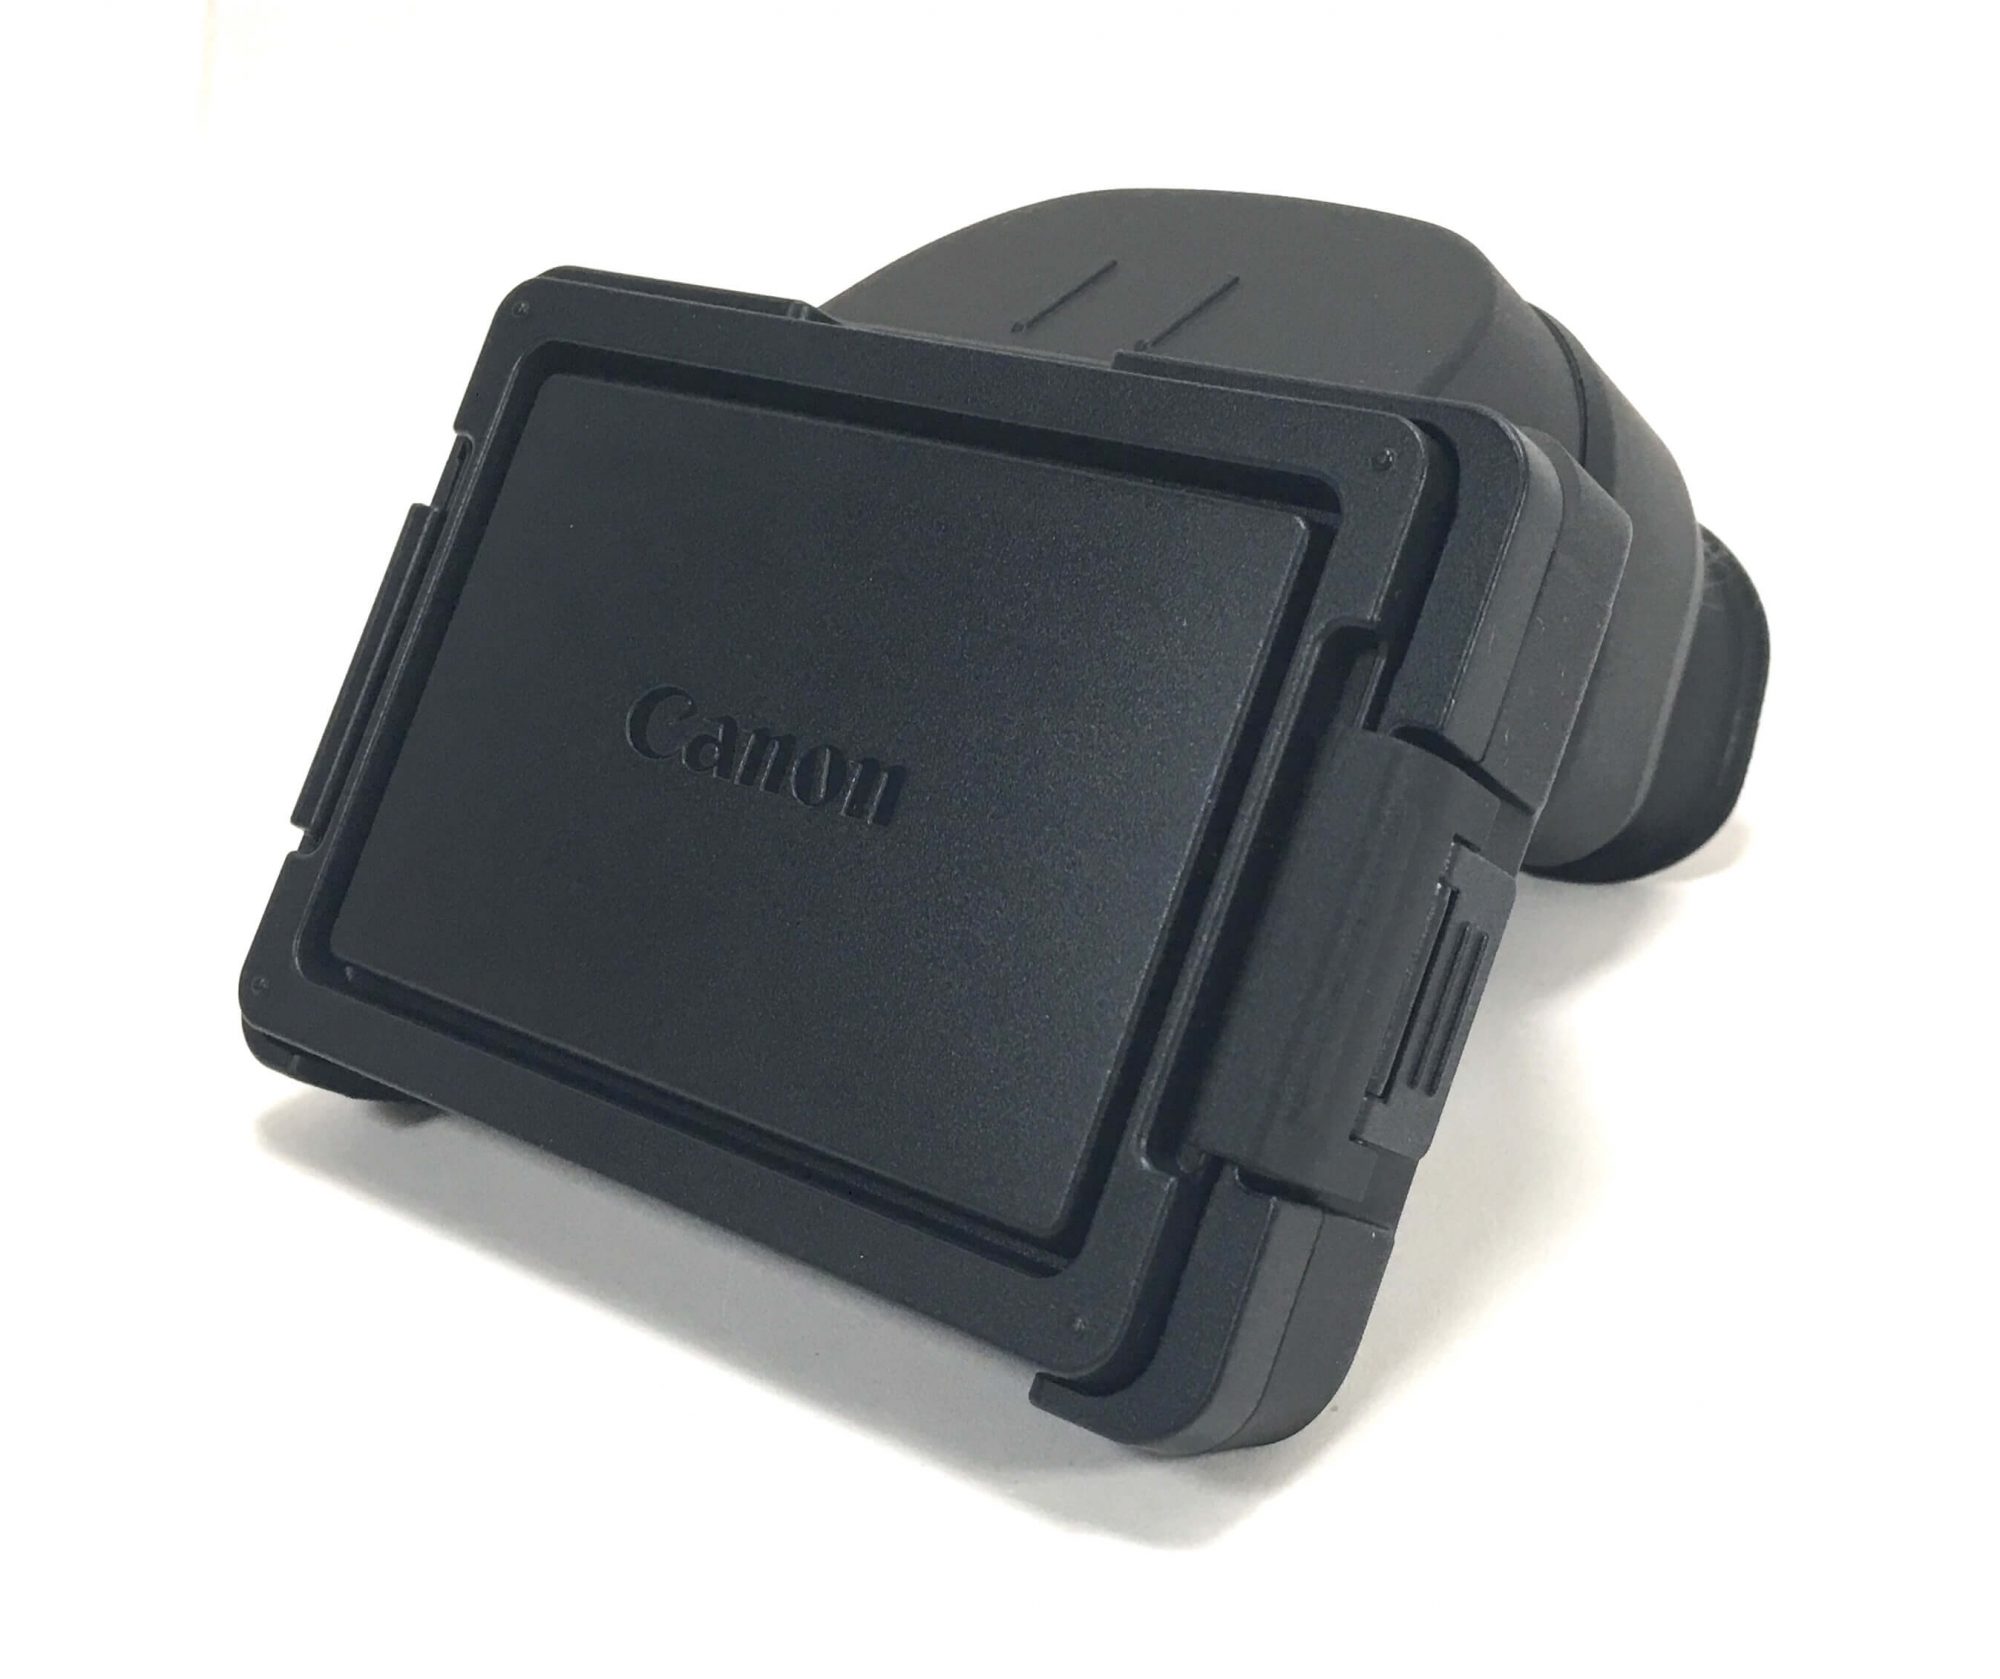 Original Viewfinder that fits on the the Canon XC10 camcorder. It is a genuine Canon part, sourced directly from Canon USA. Brand new factory fresh. Free Shipping.